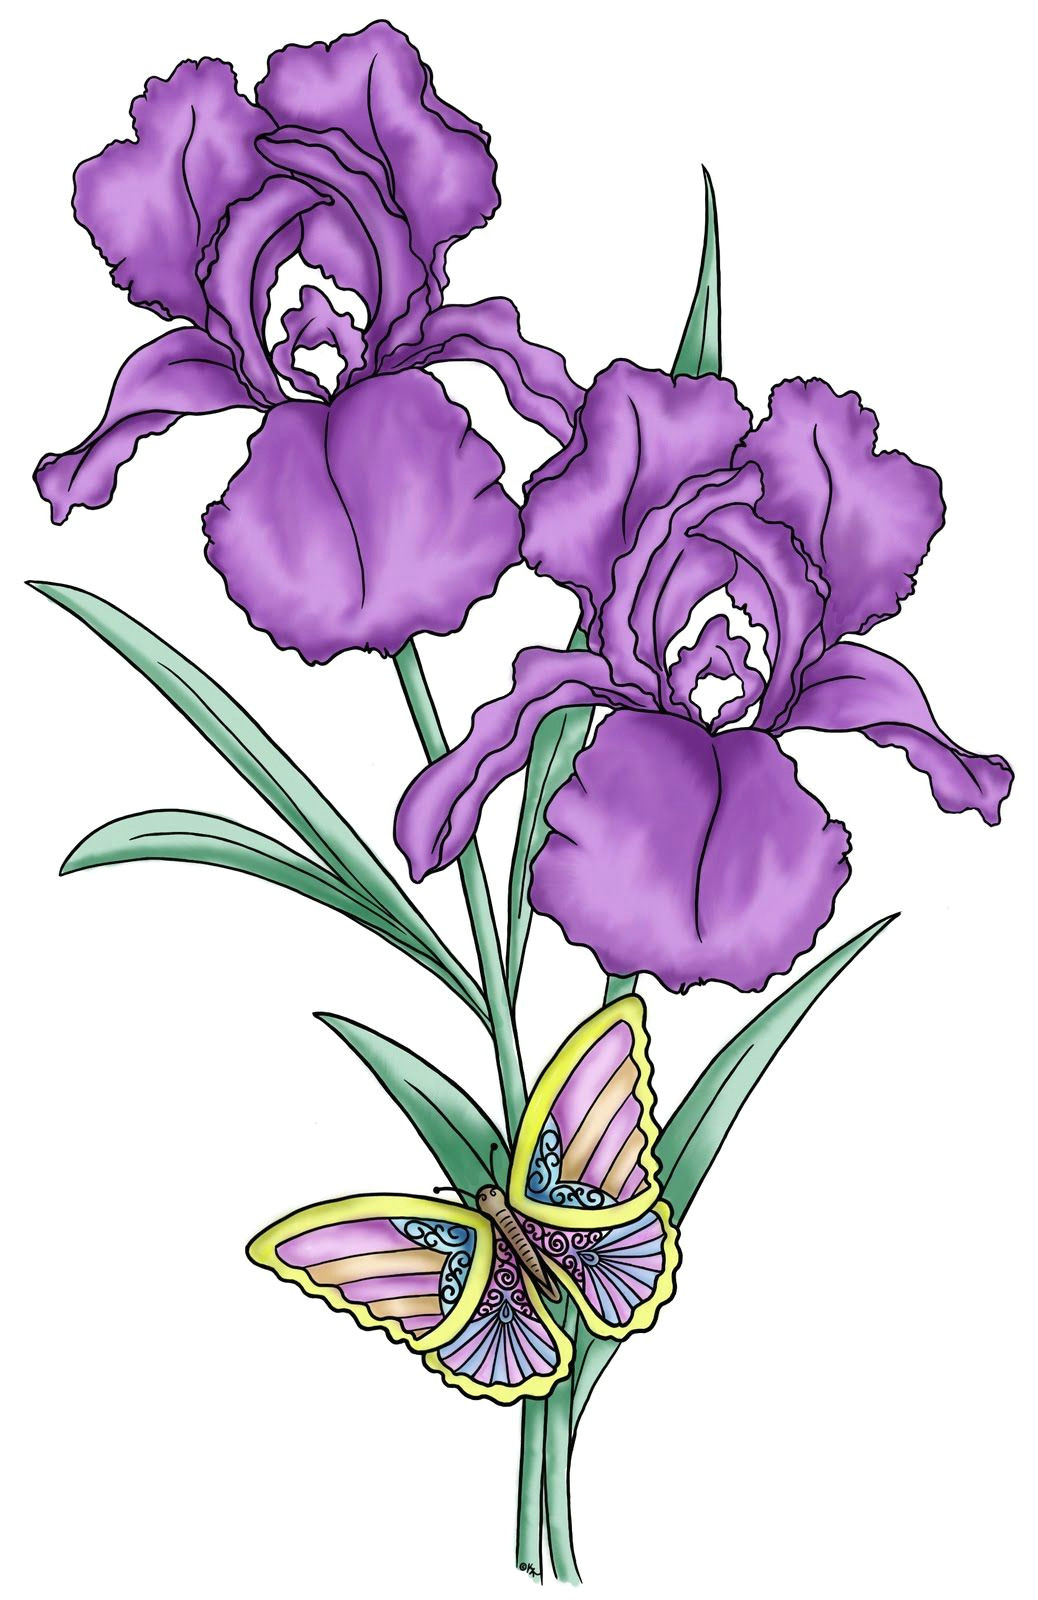 Drawings Of Purple Flowers the Iris Flower is Of Interest as An Example Of the Relation Between